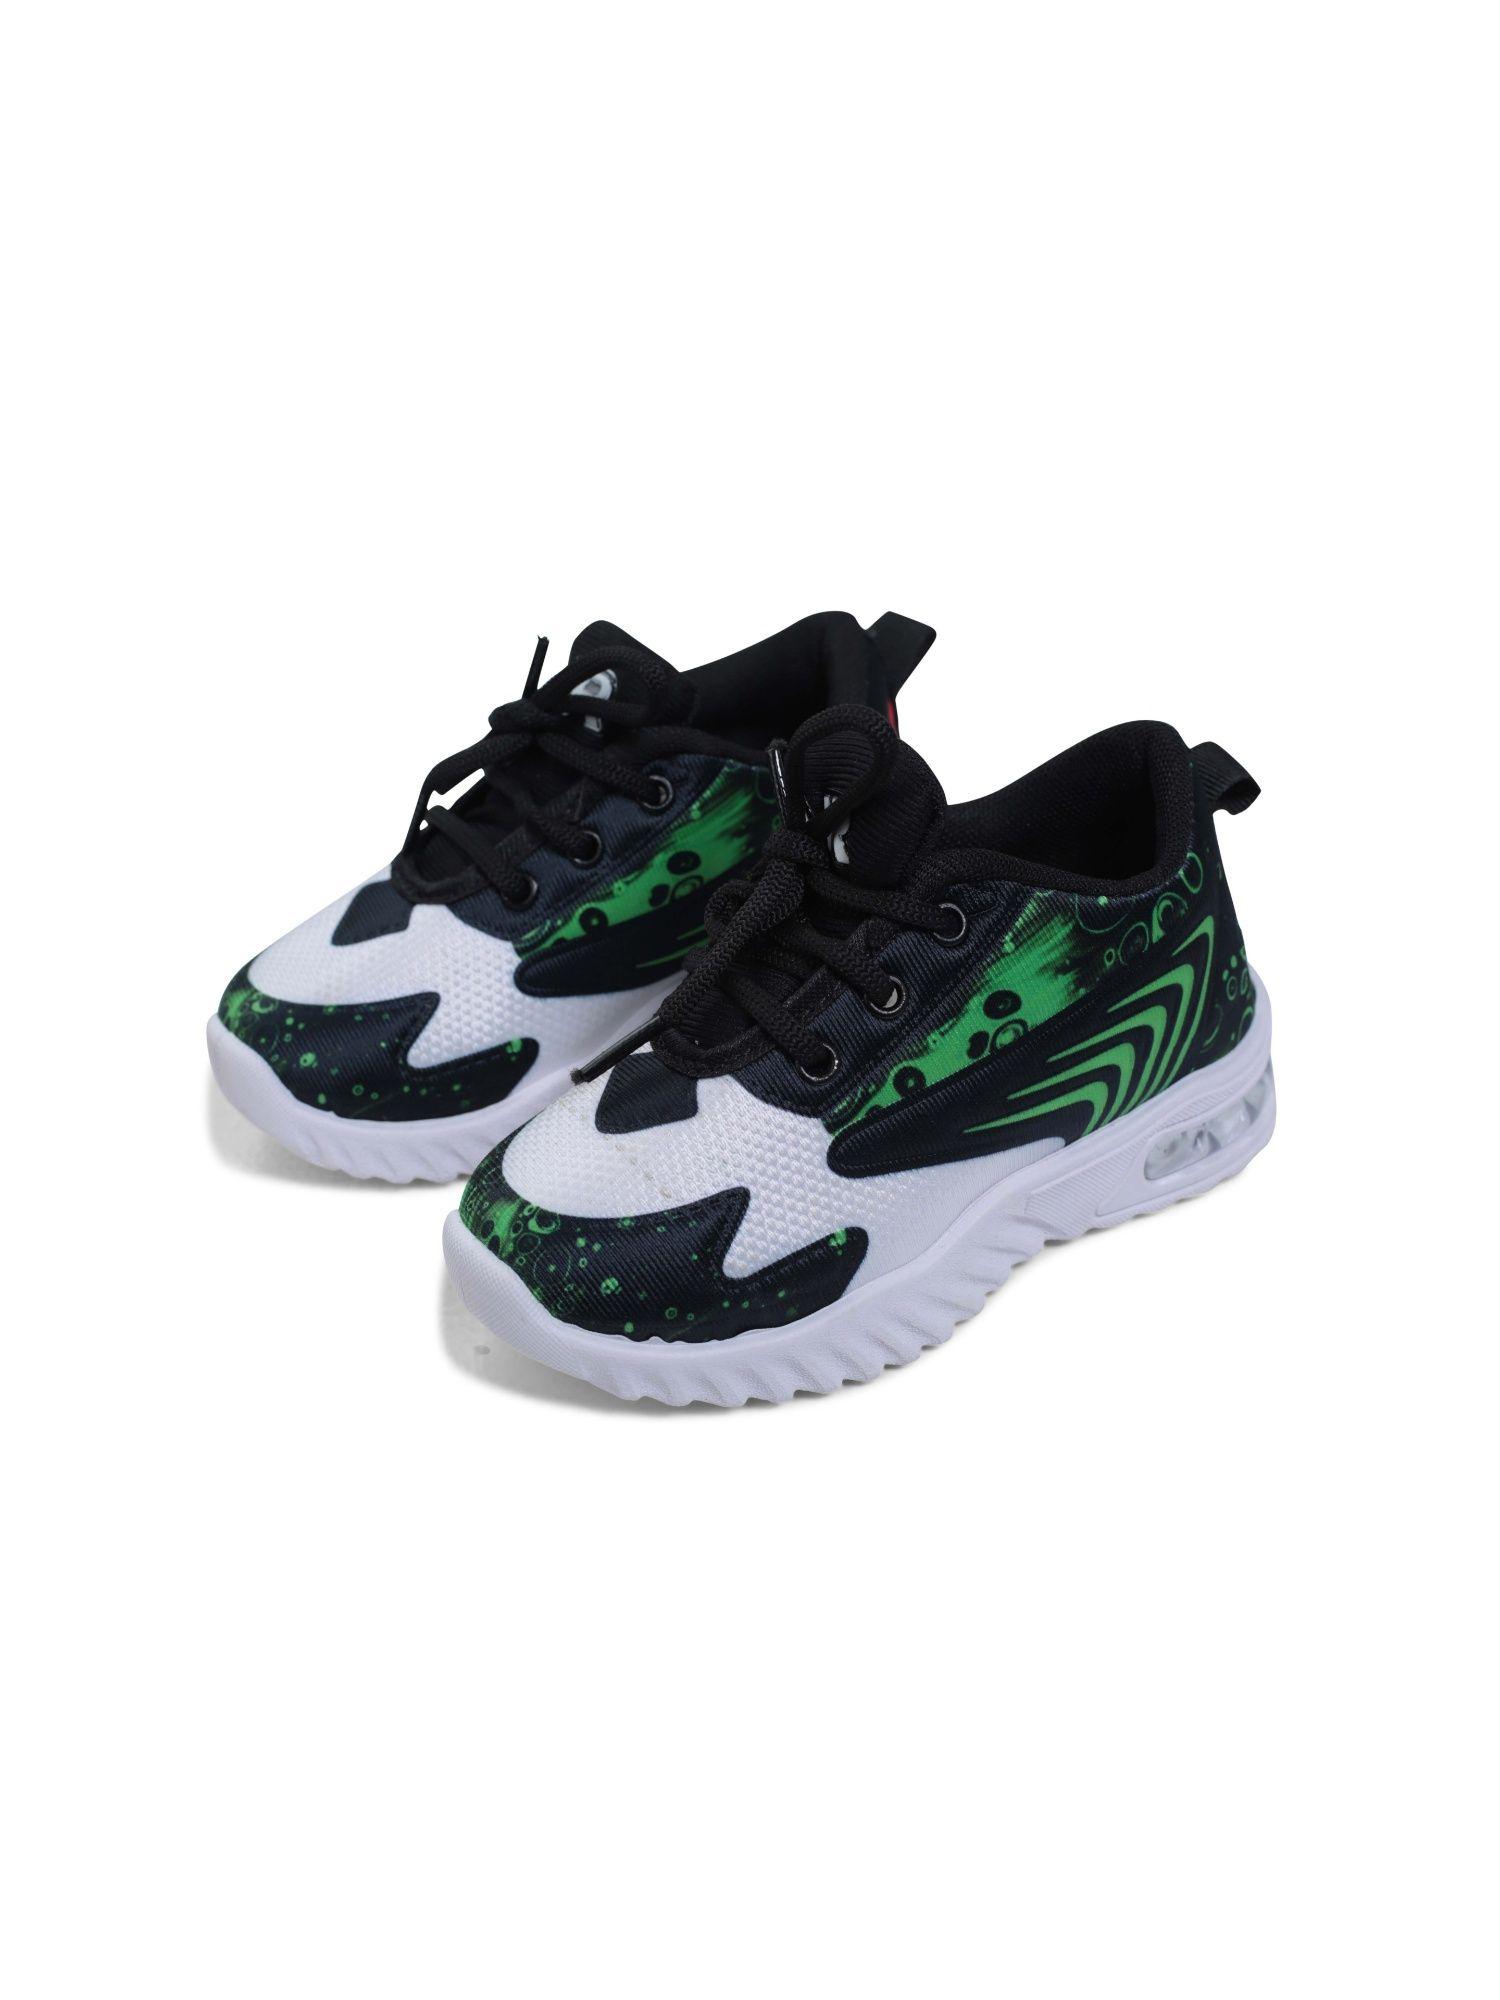 party wear led shoes - green